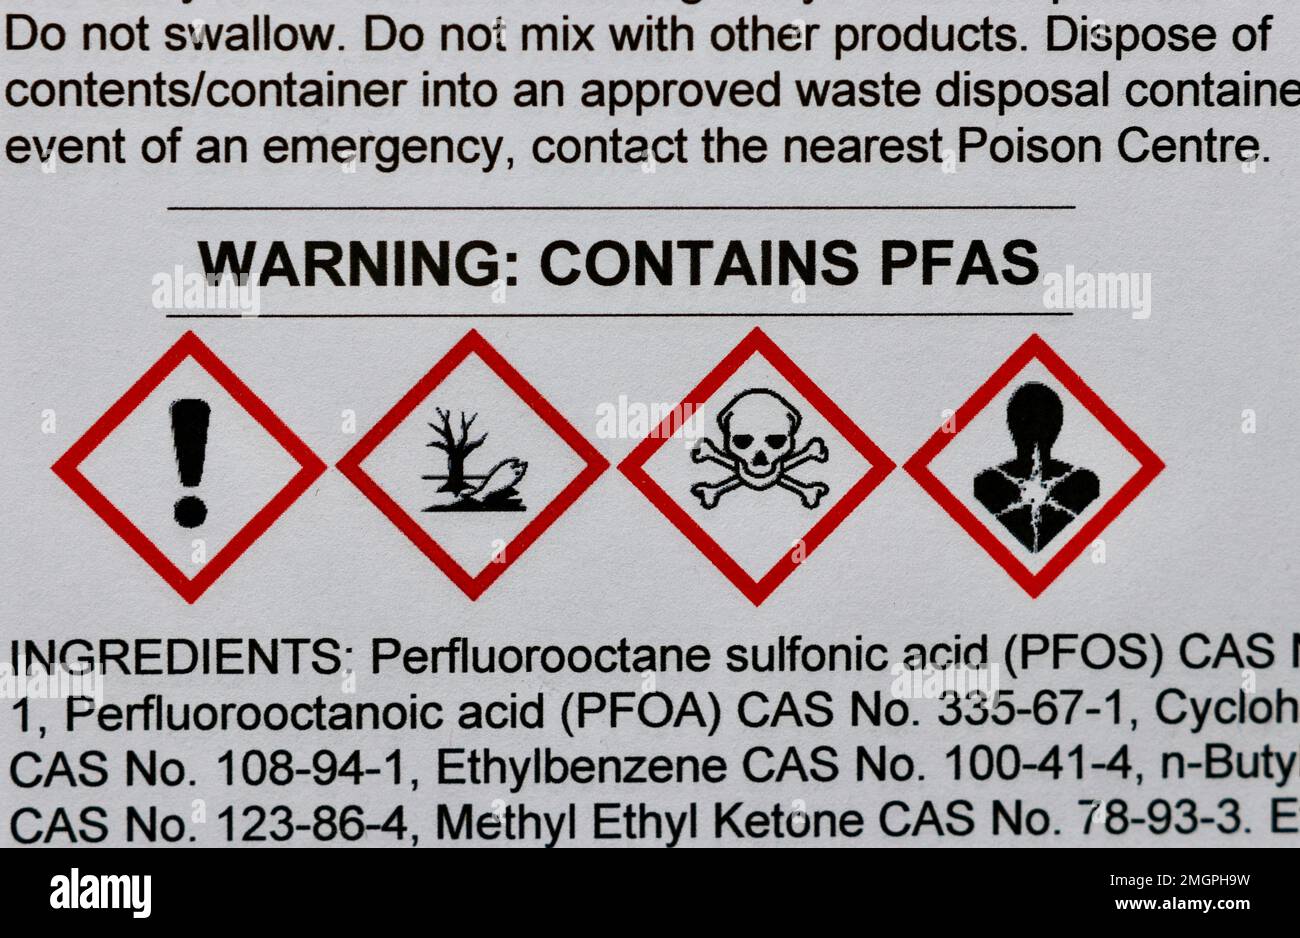 Warning on a Safety Data Sheet showing that the product contains PFAS substances, or forever chemicals. Standard chemical hazard pictograms are shown Stock Photo